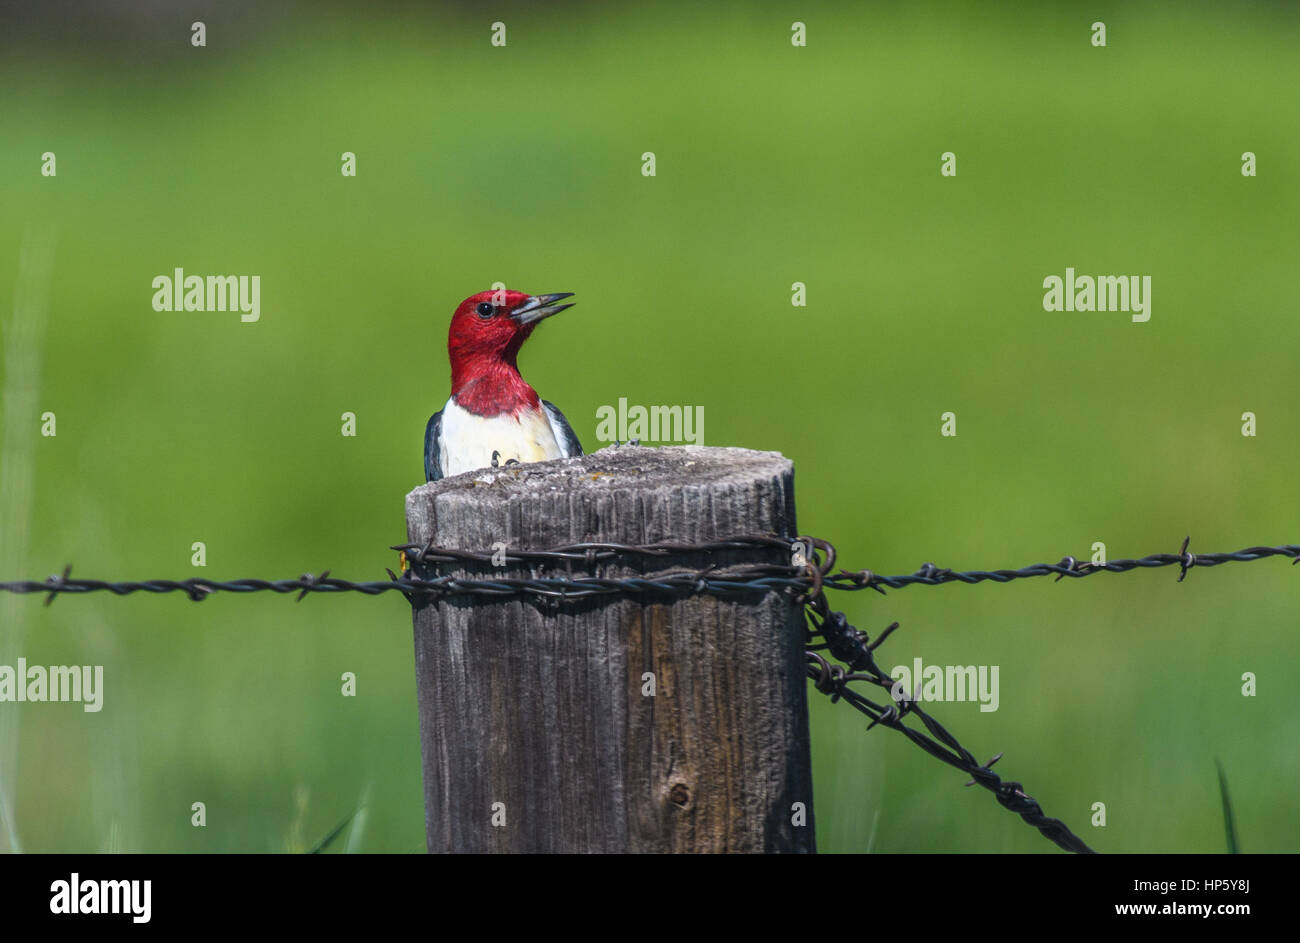 A Red-headed Woodpecker Peeks Over the Top of a Fence Post Stock Photo